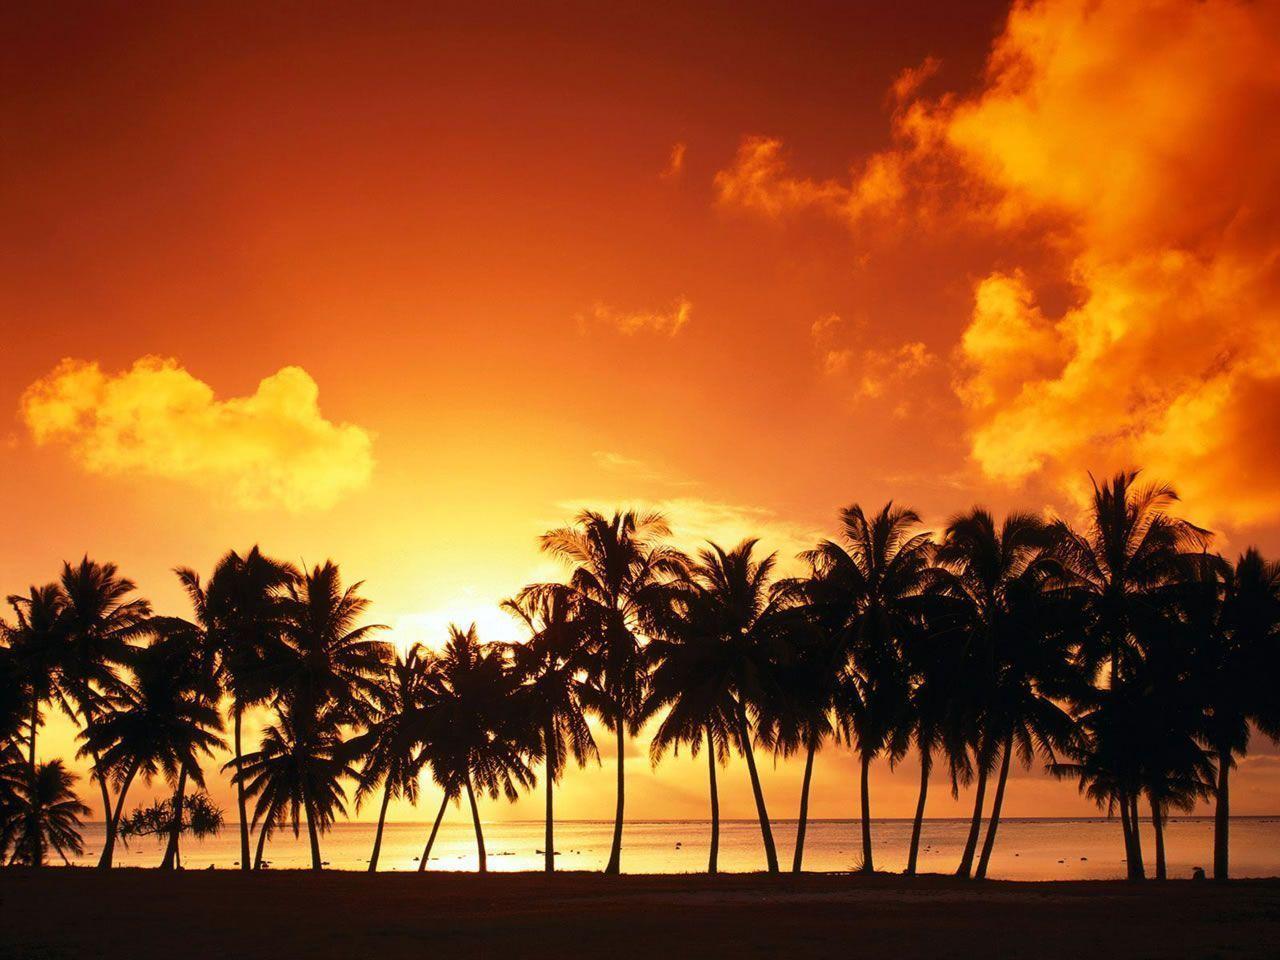 Sunset Palm 12627 HD Wallpaper Picture. Top Wallpaper Gallery Photo